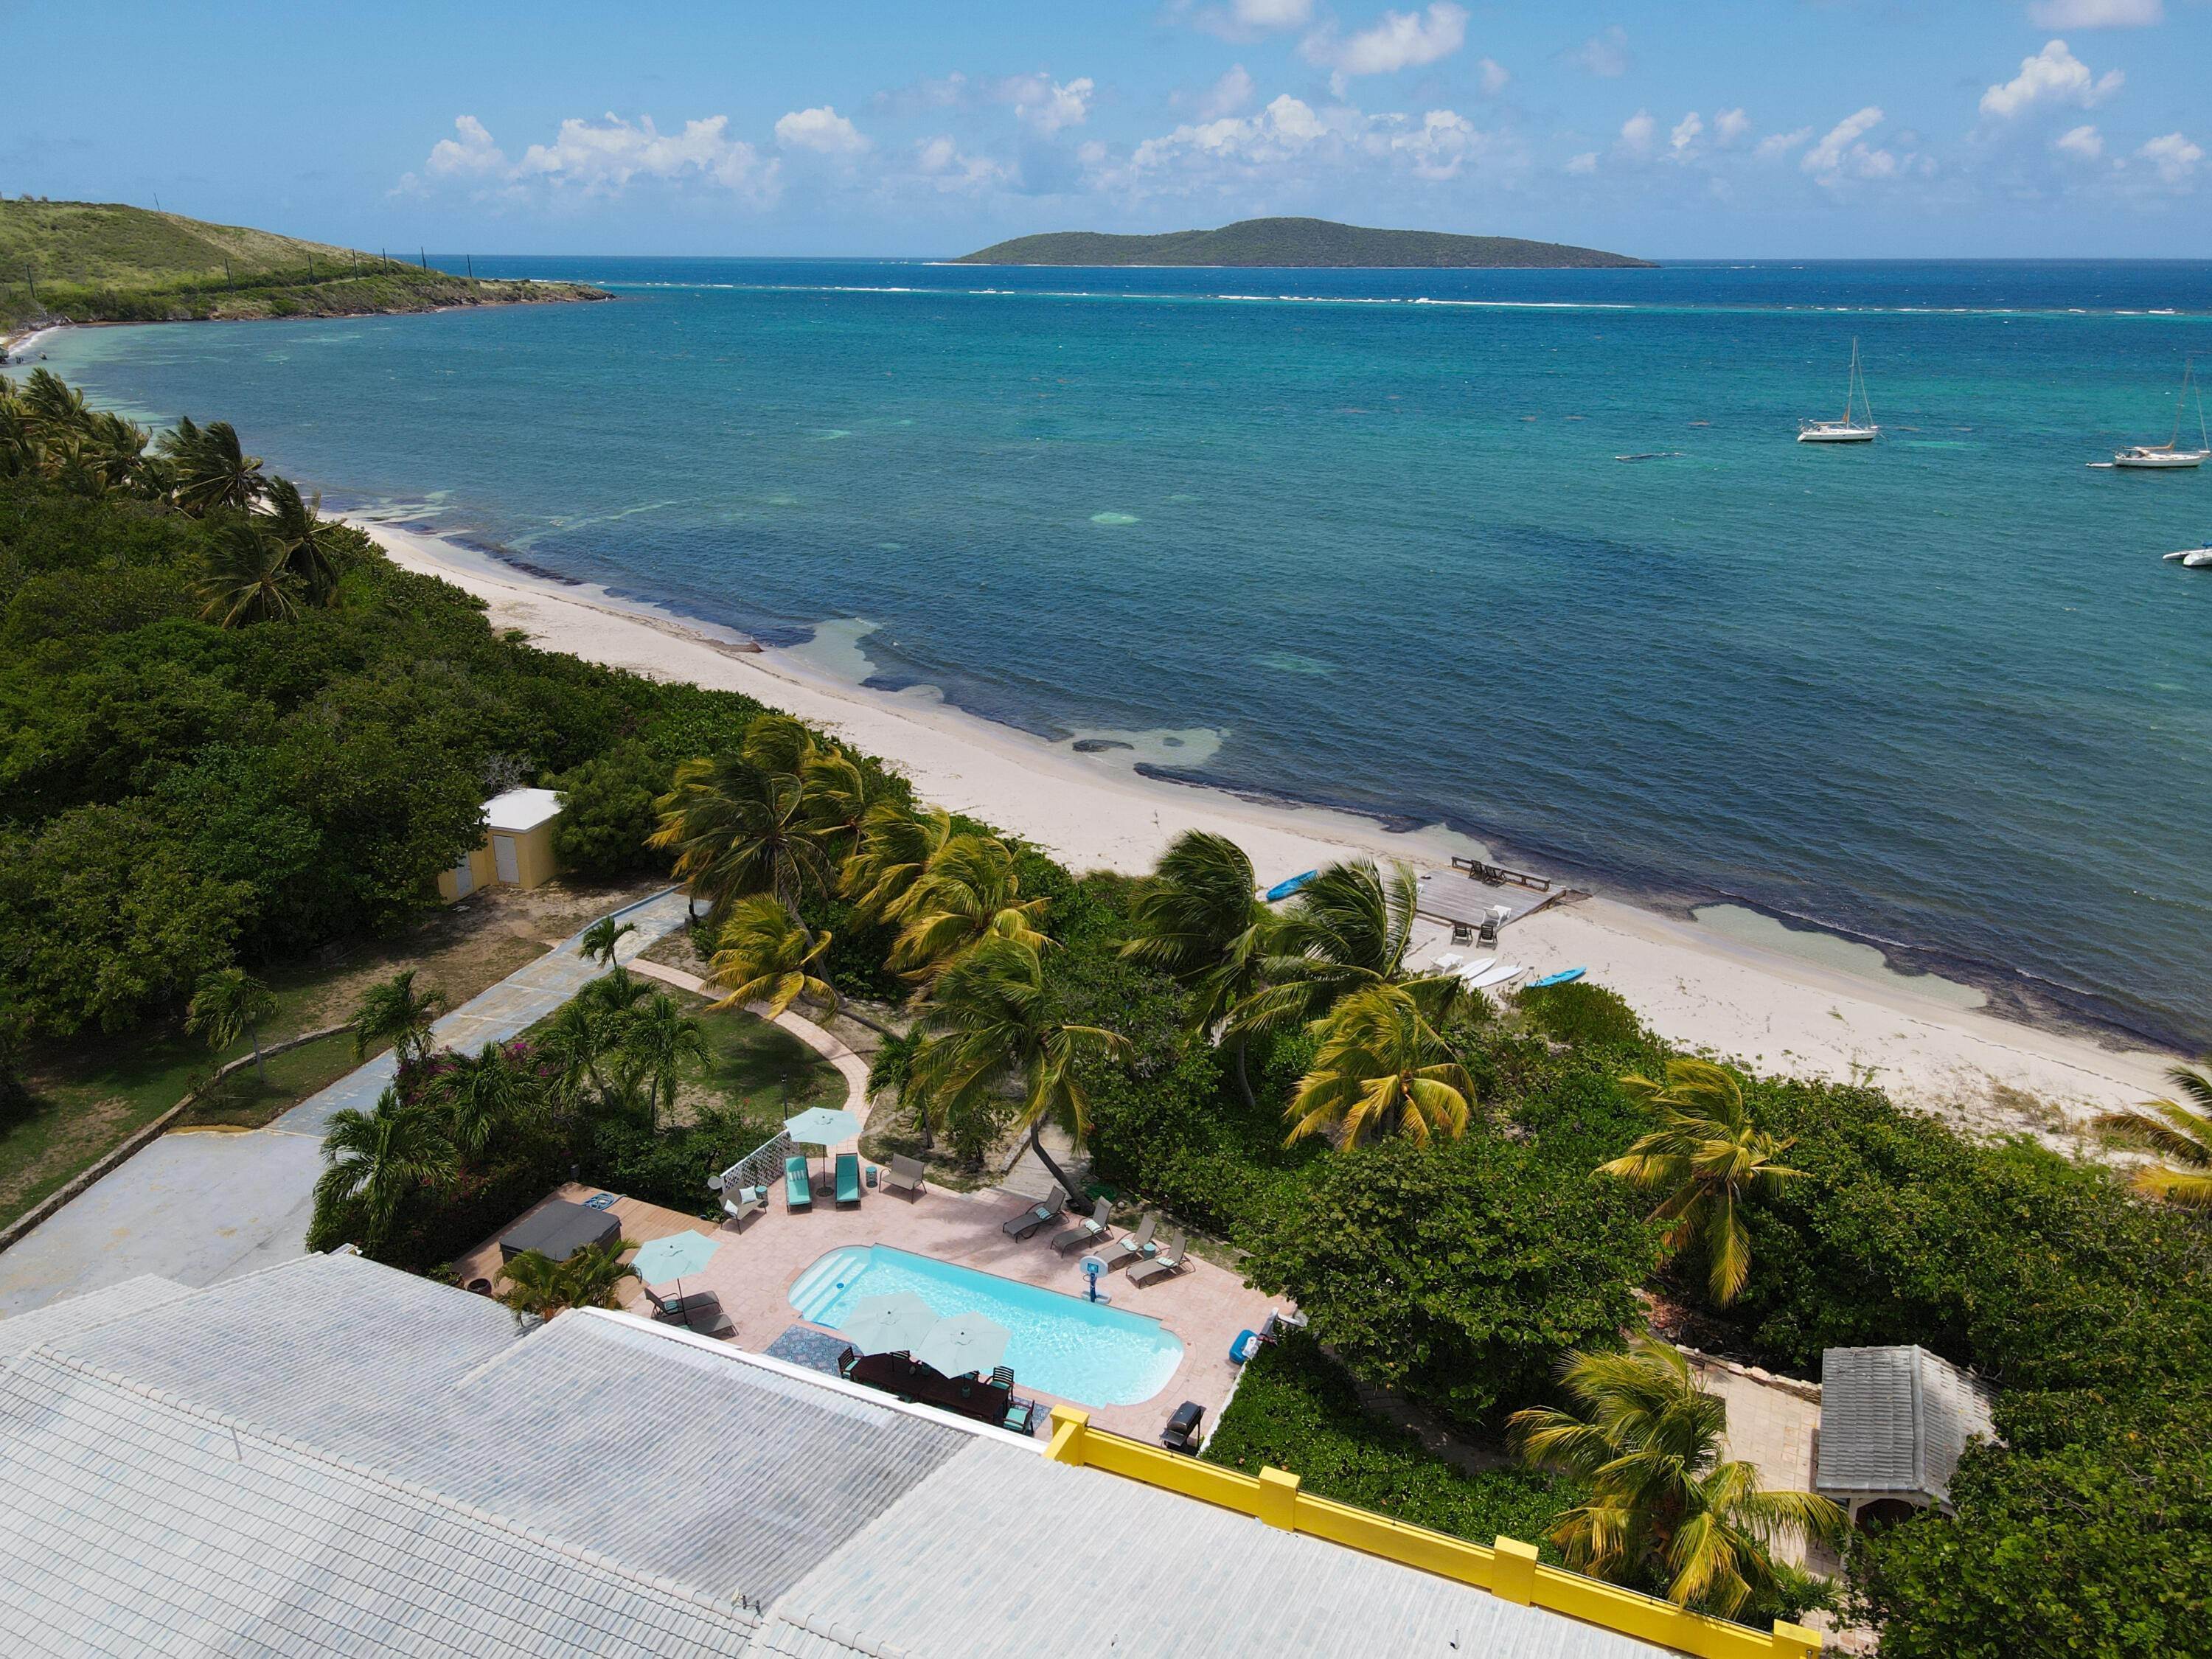 Single Family Homes for Sale at 7 North Slob EB St Croix, Virgin Islands 00820 United States Virgin Islands